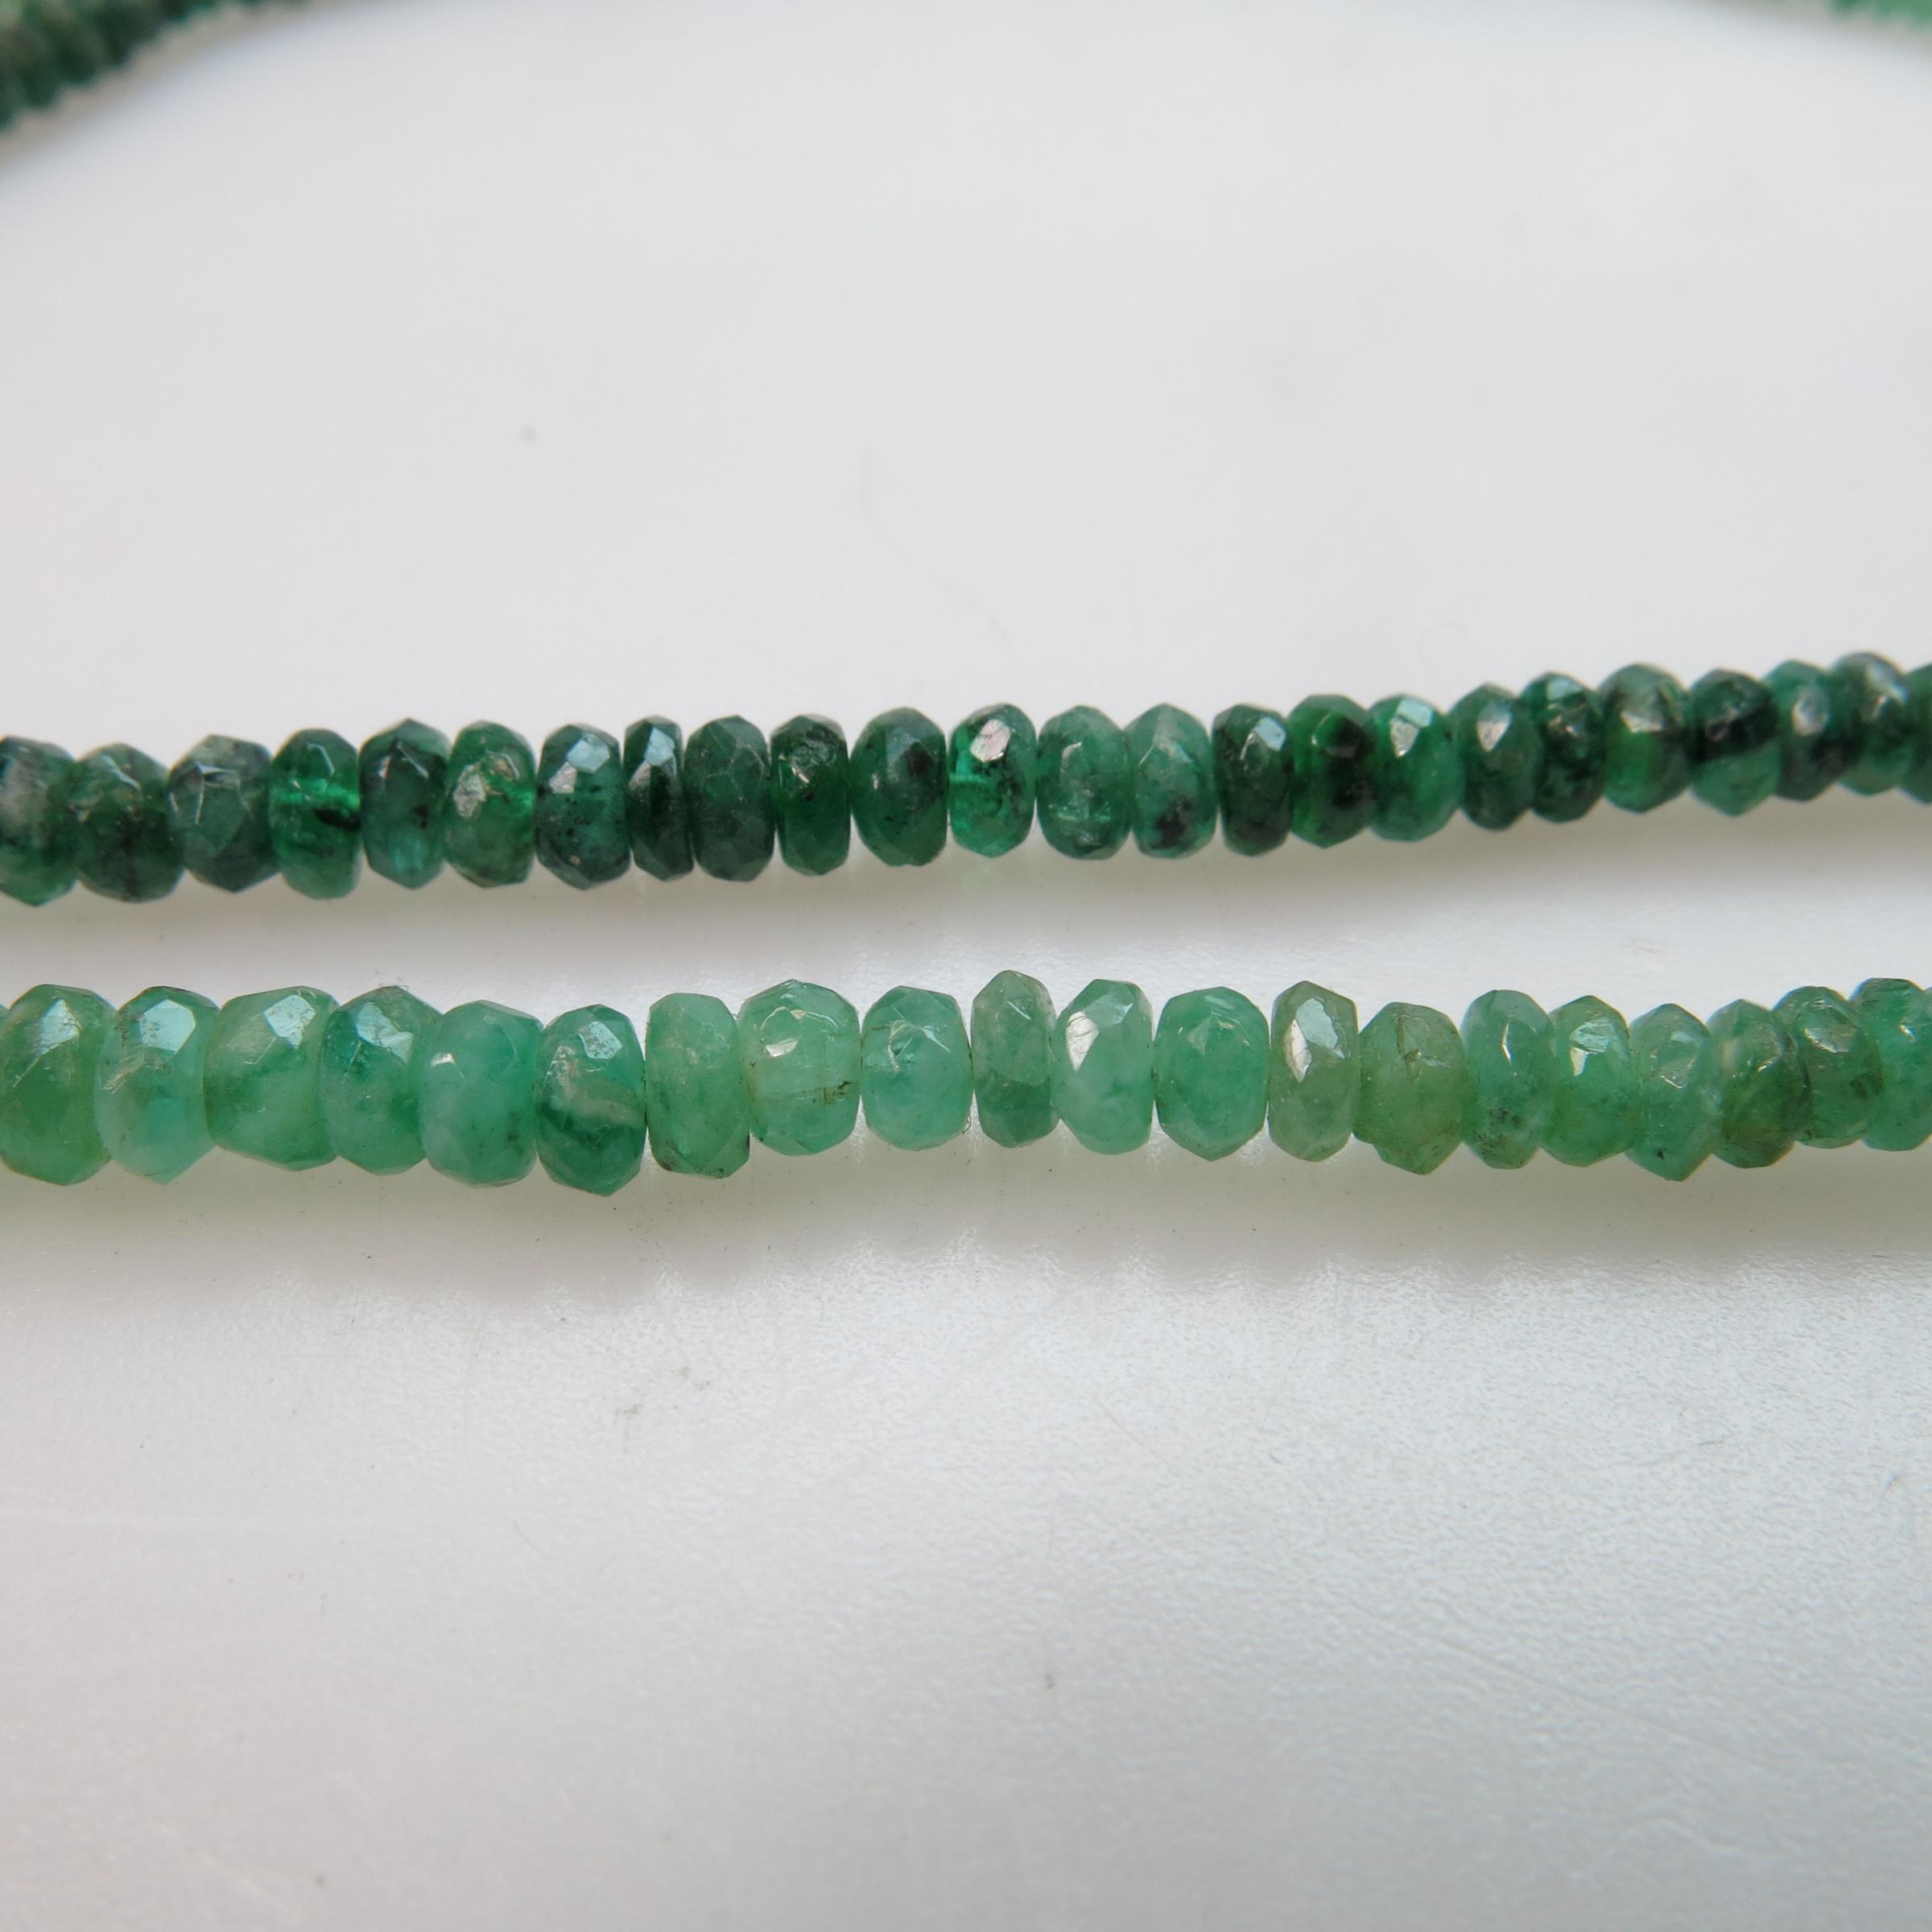 2 Facetted Emerald Bead Necklaces